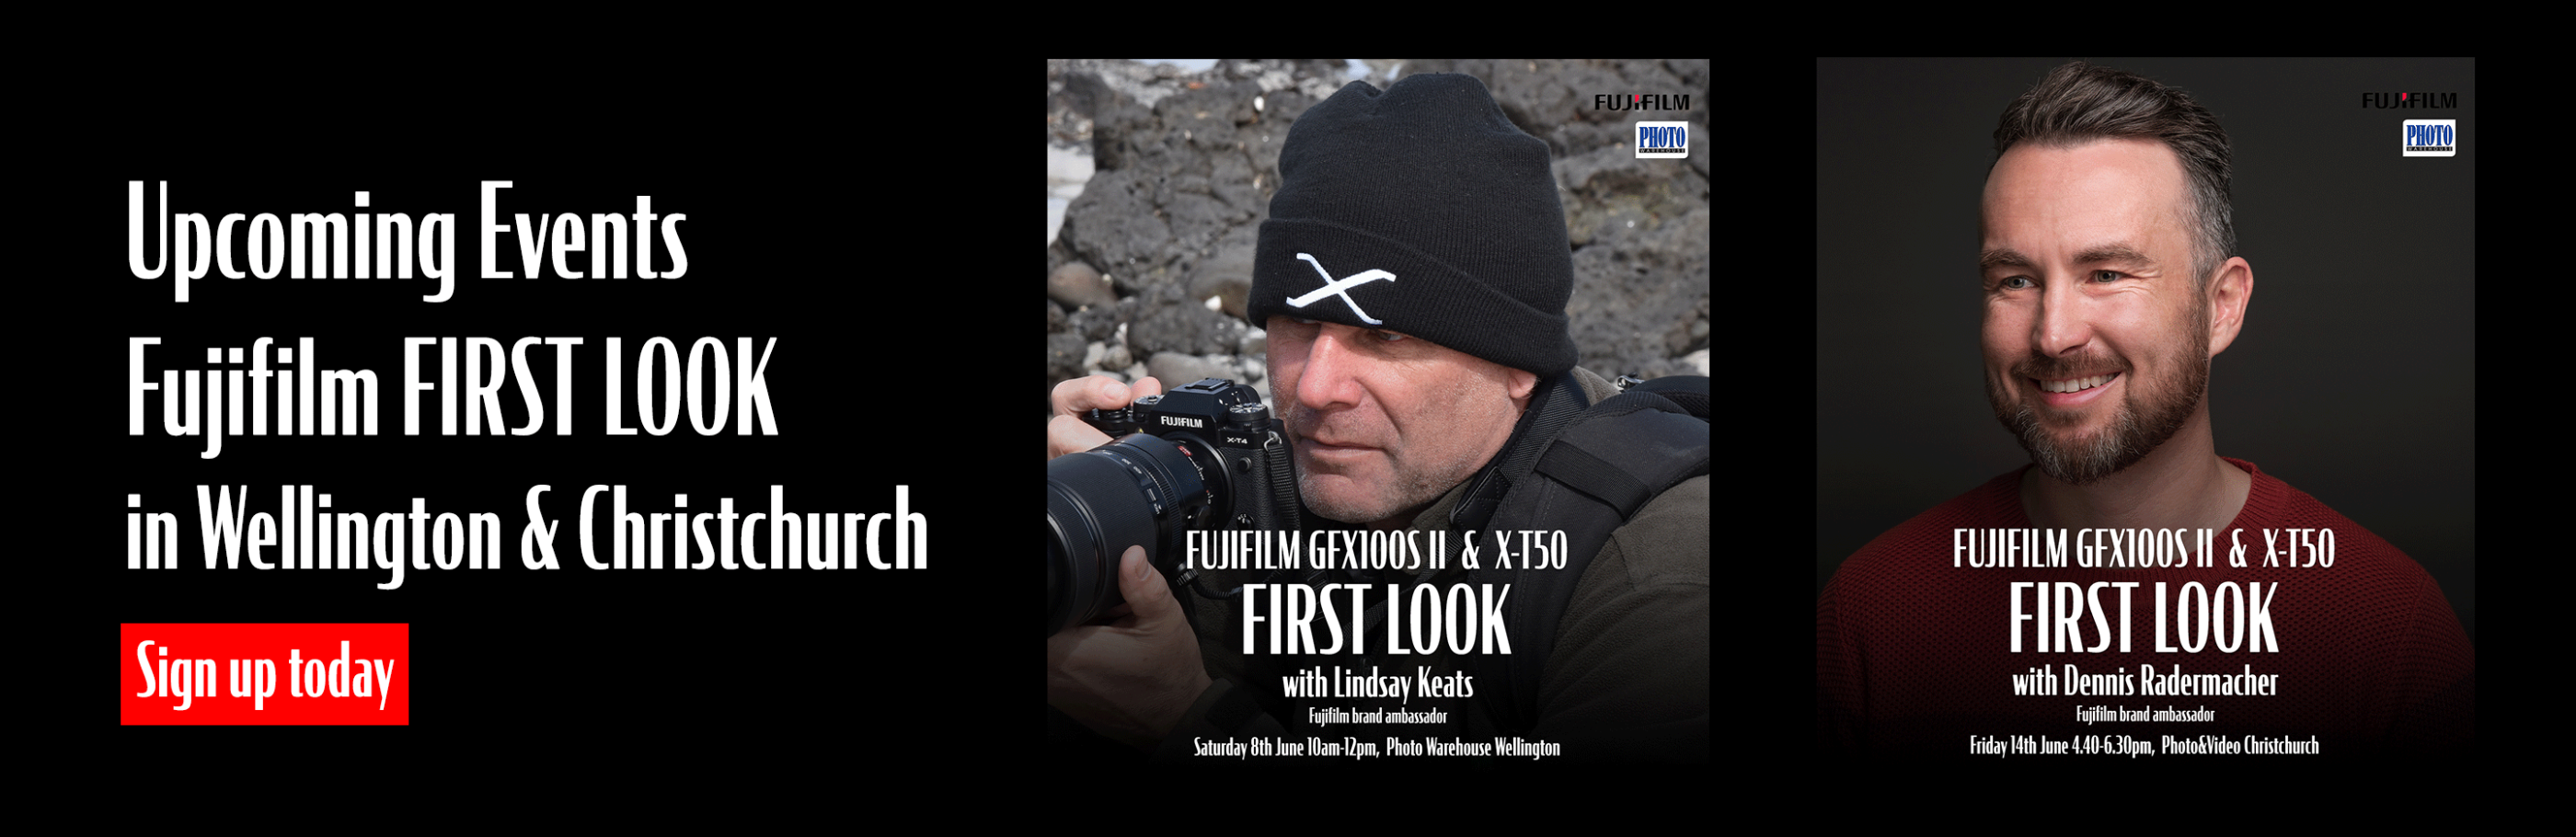 FIRST LOOK - FUJIFILM EVENTS